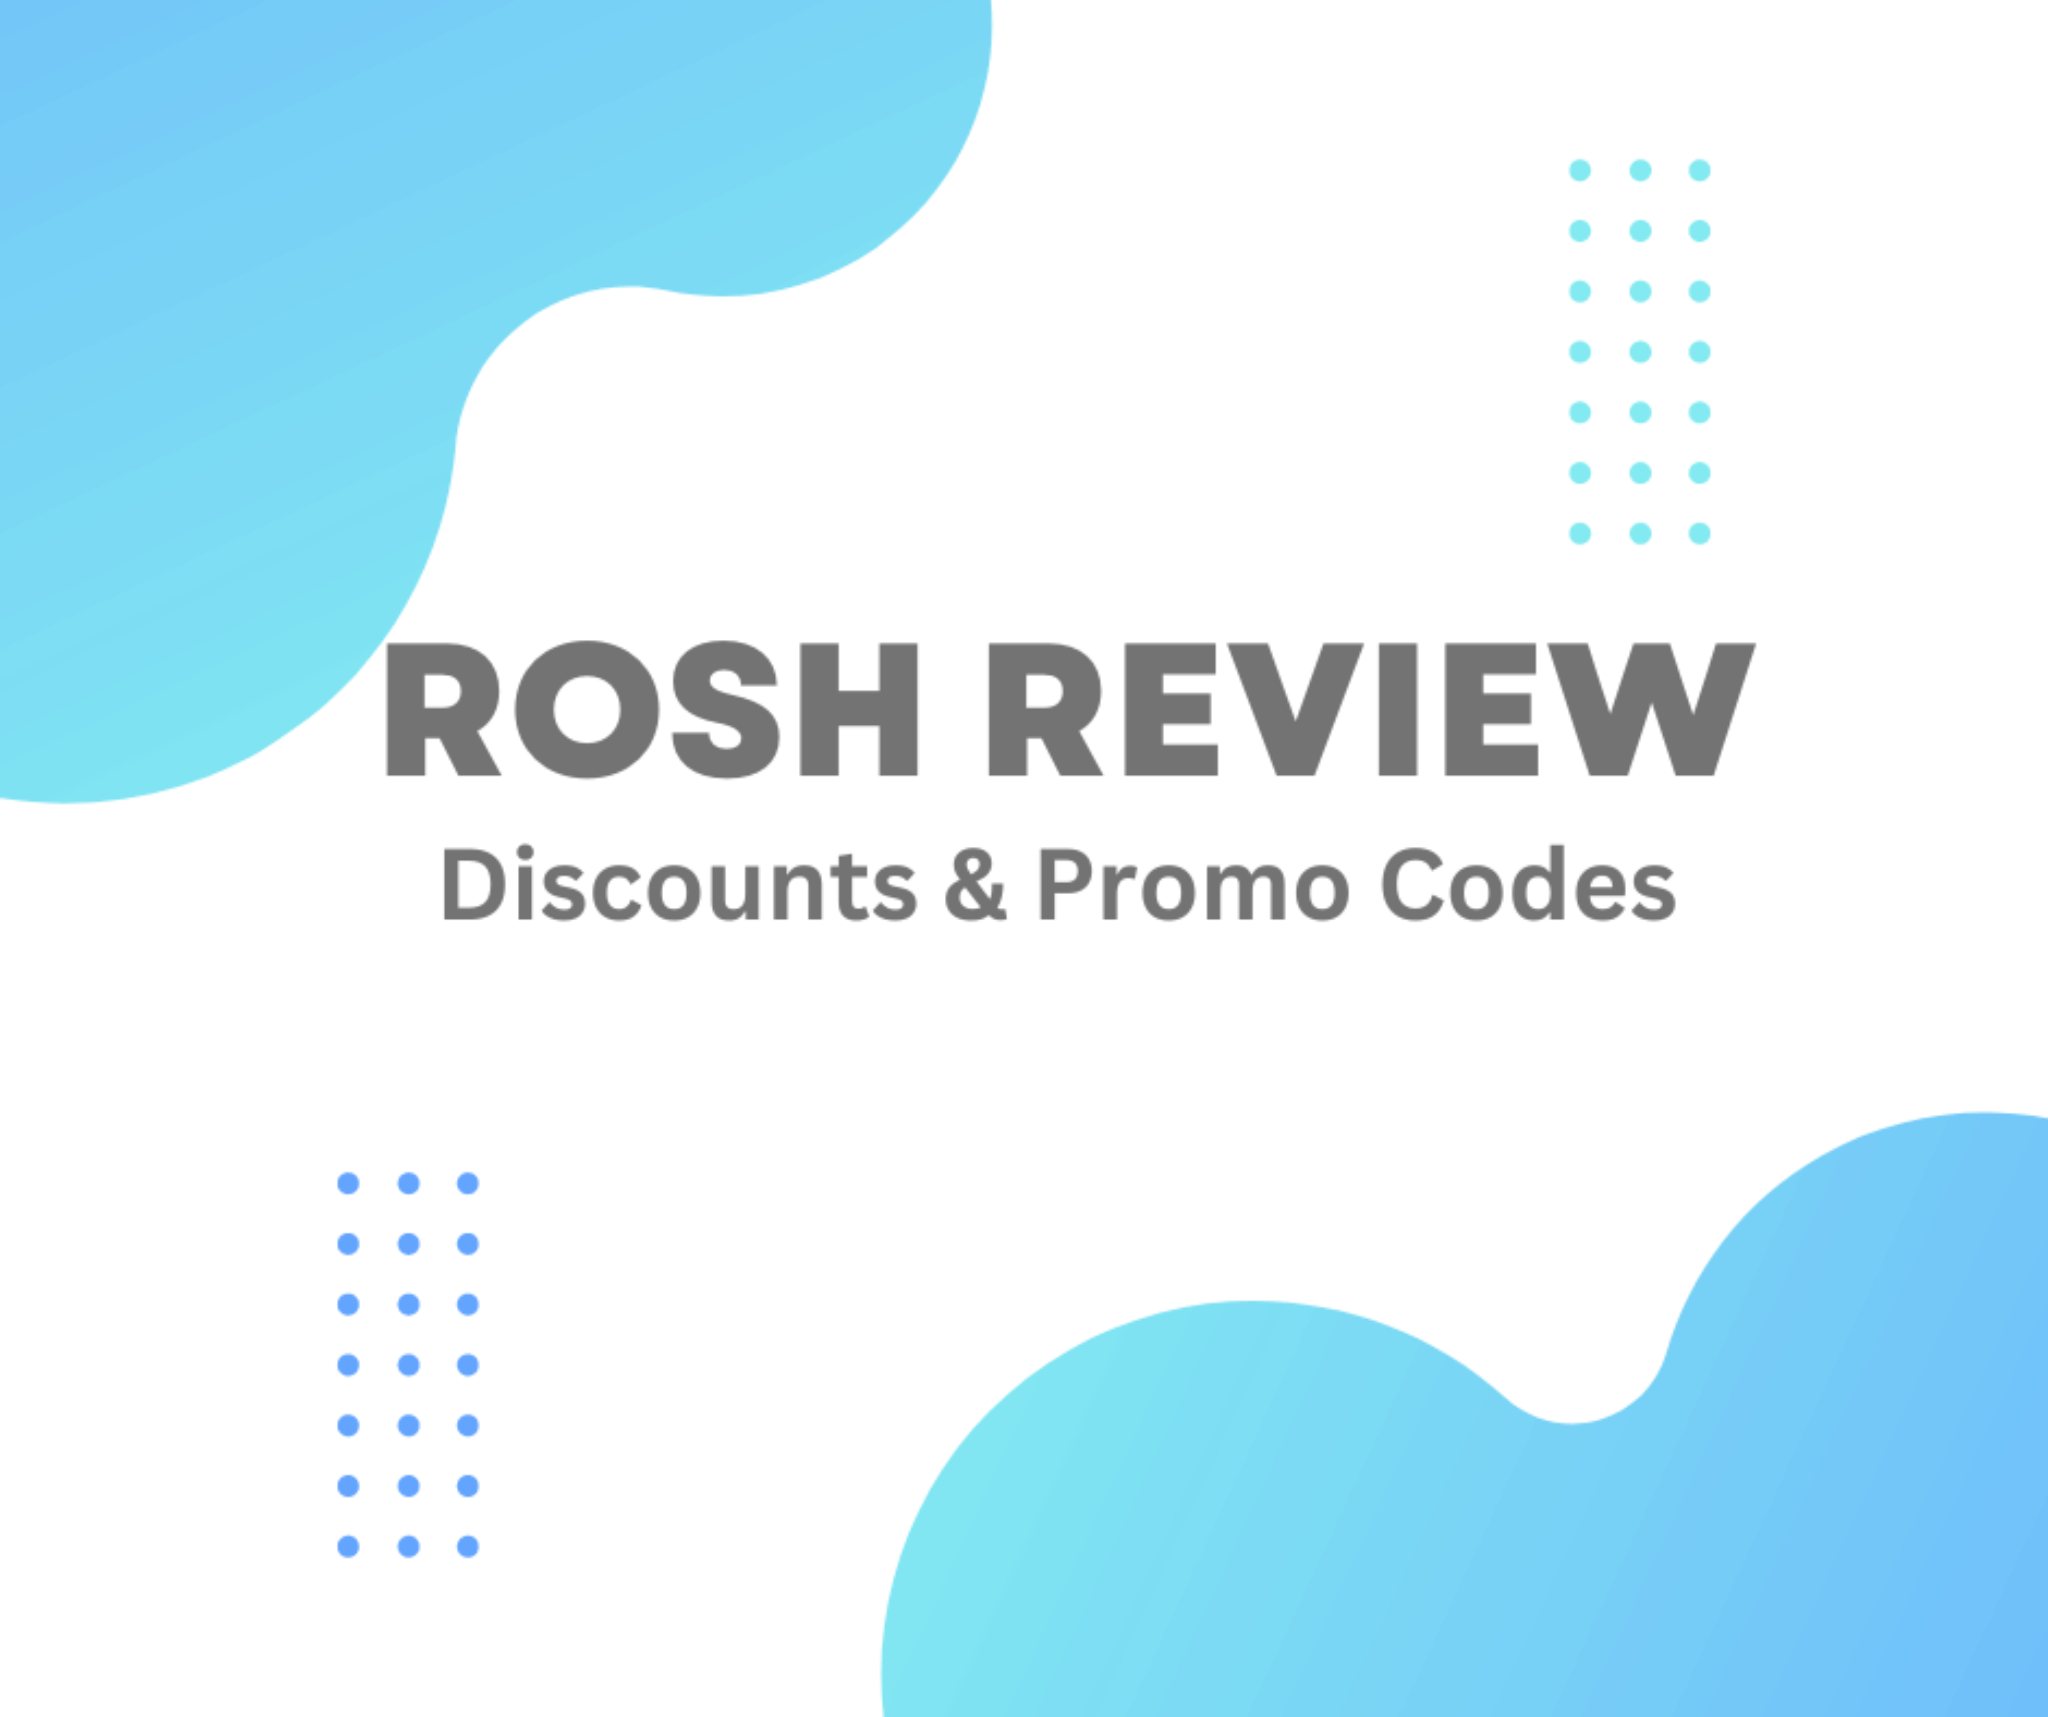 Rosh Review Discounts & Promo Codes Crush Your Exam!